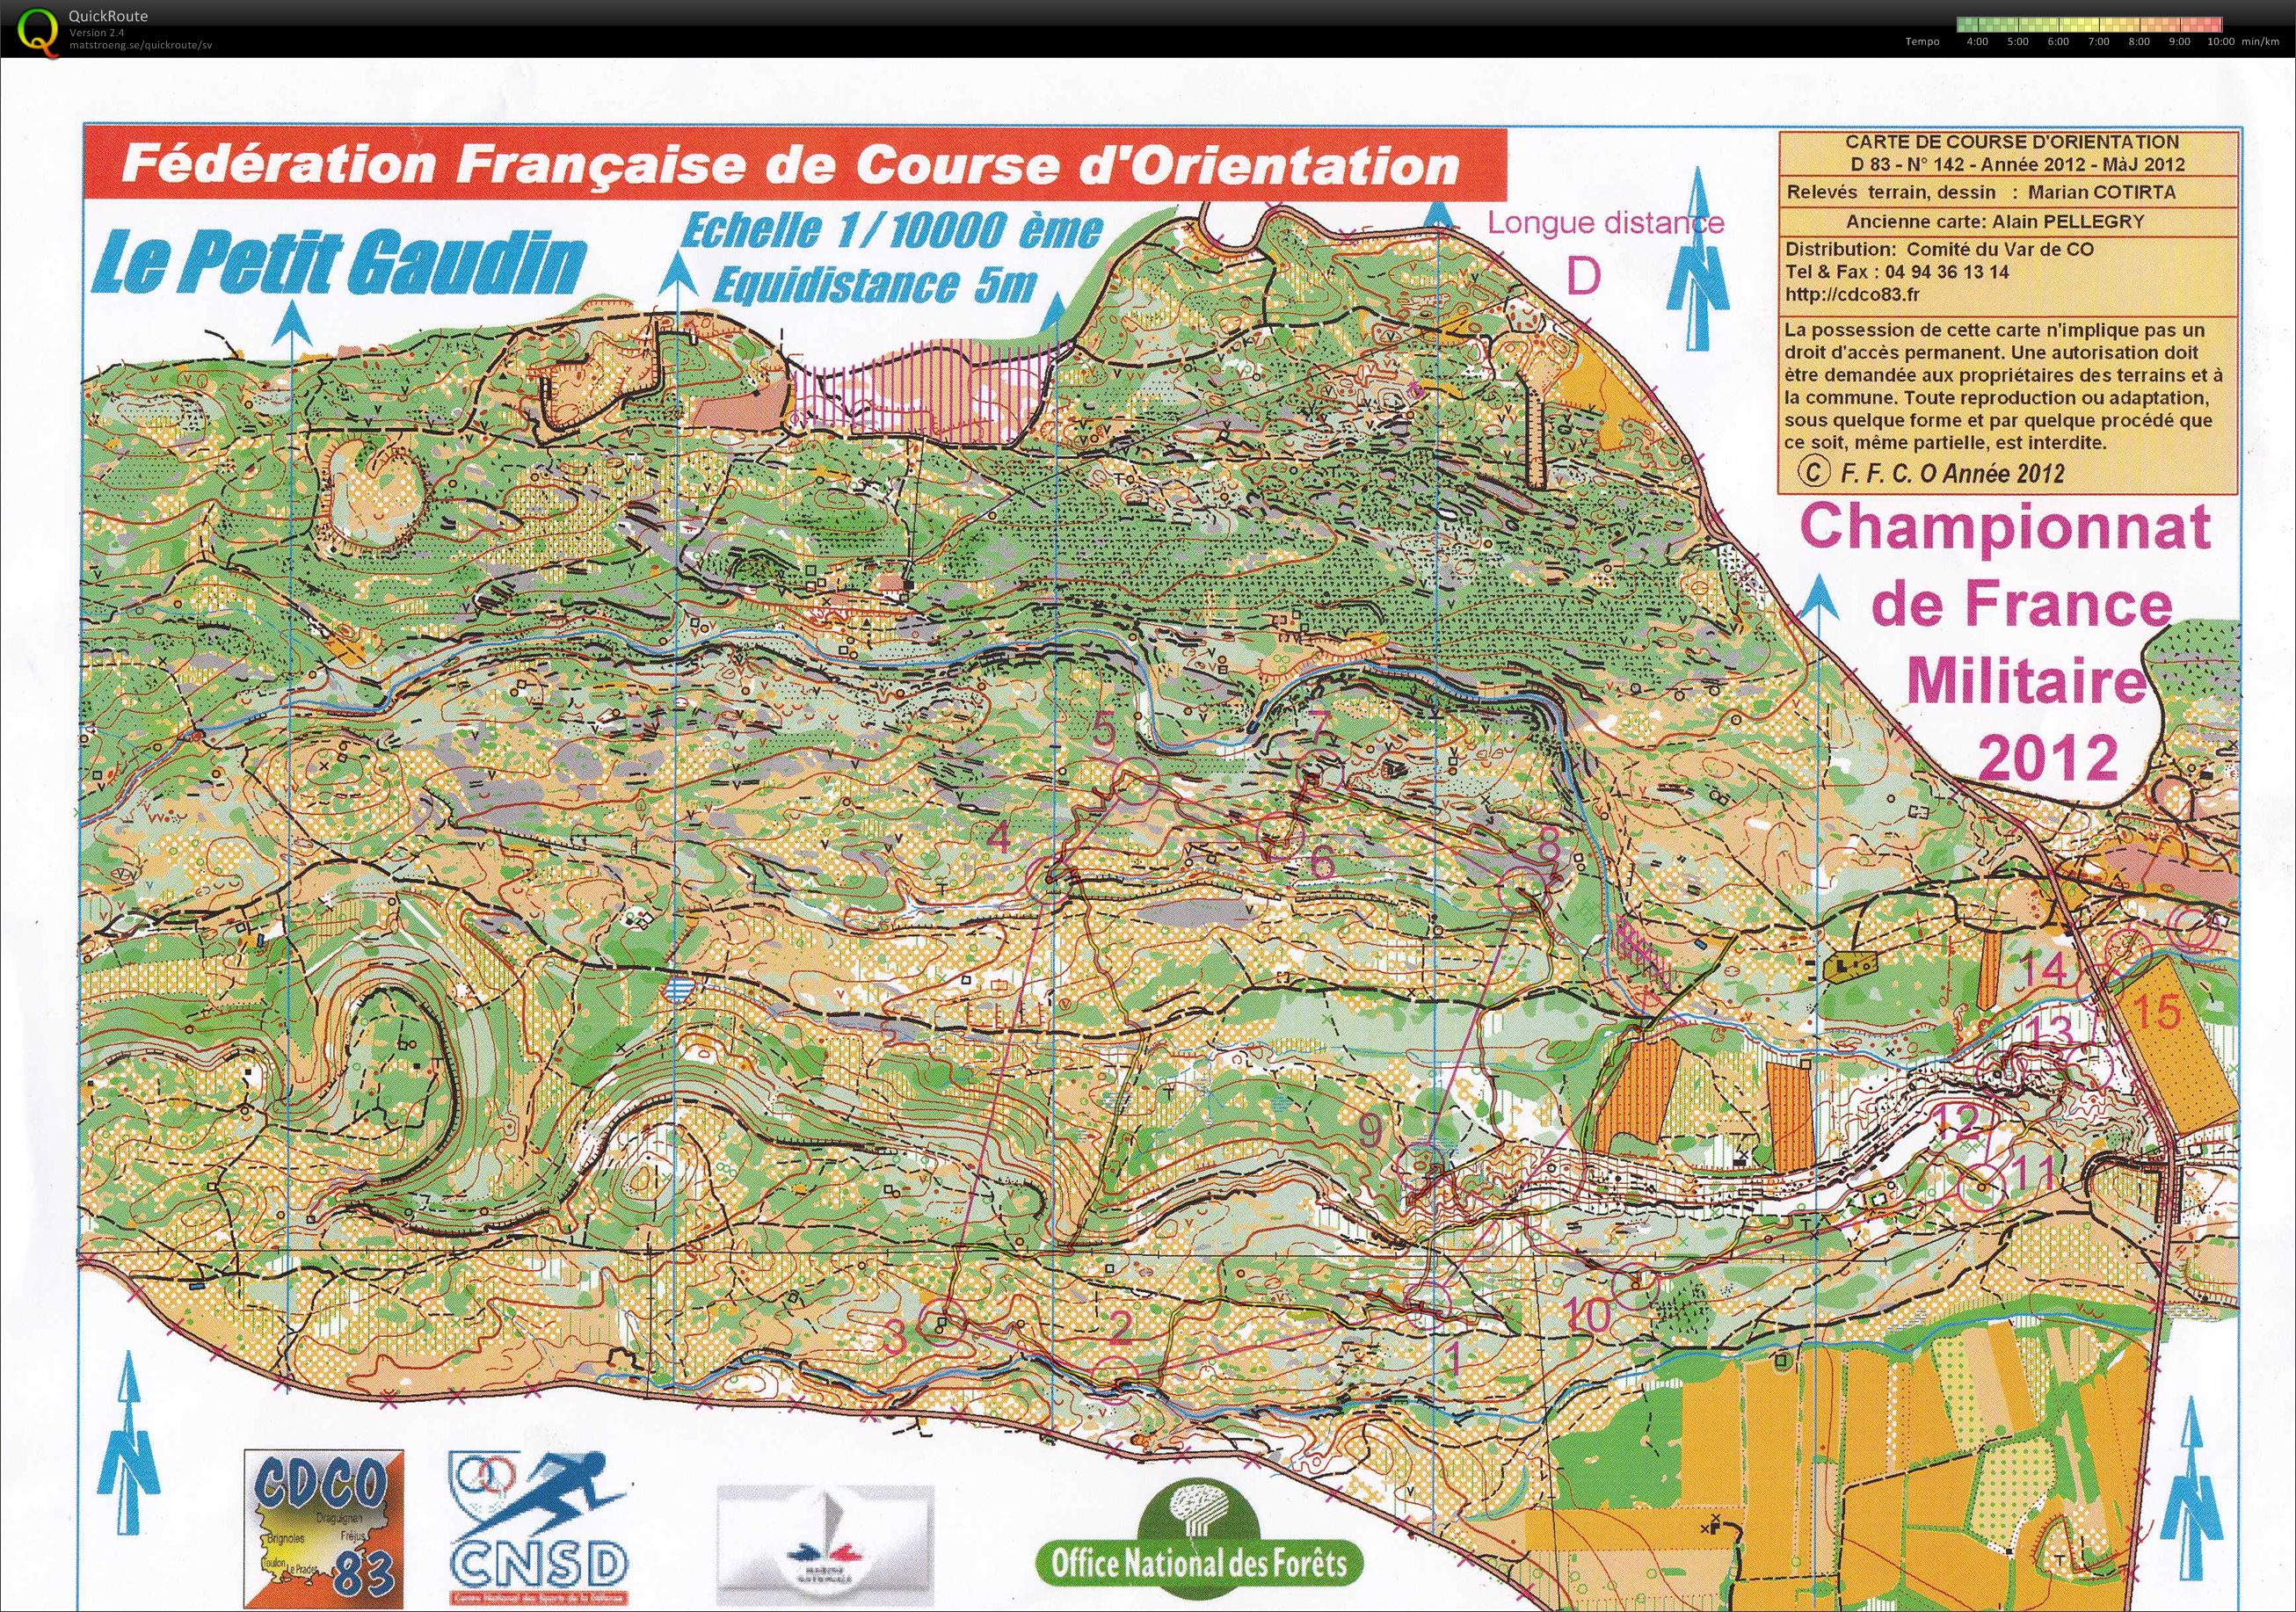 Open race after French Military long dist champ H60 (11.05.2012)